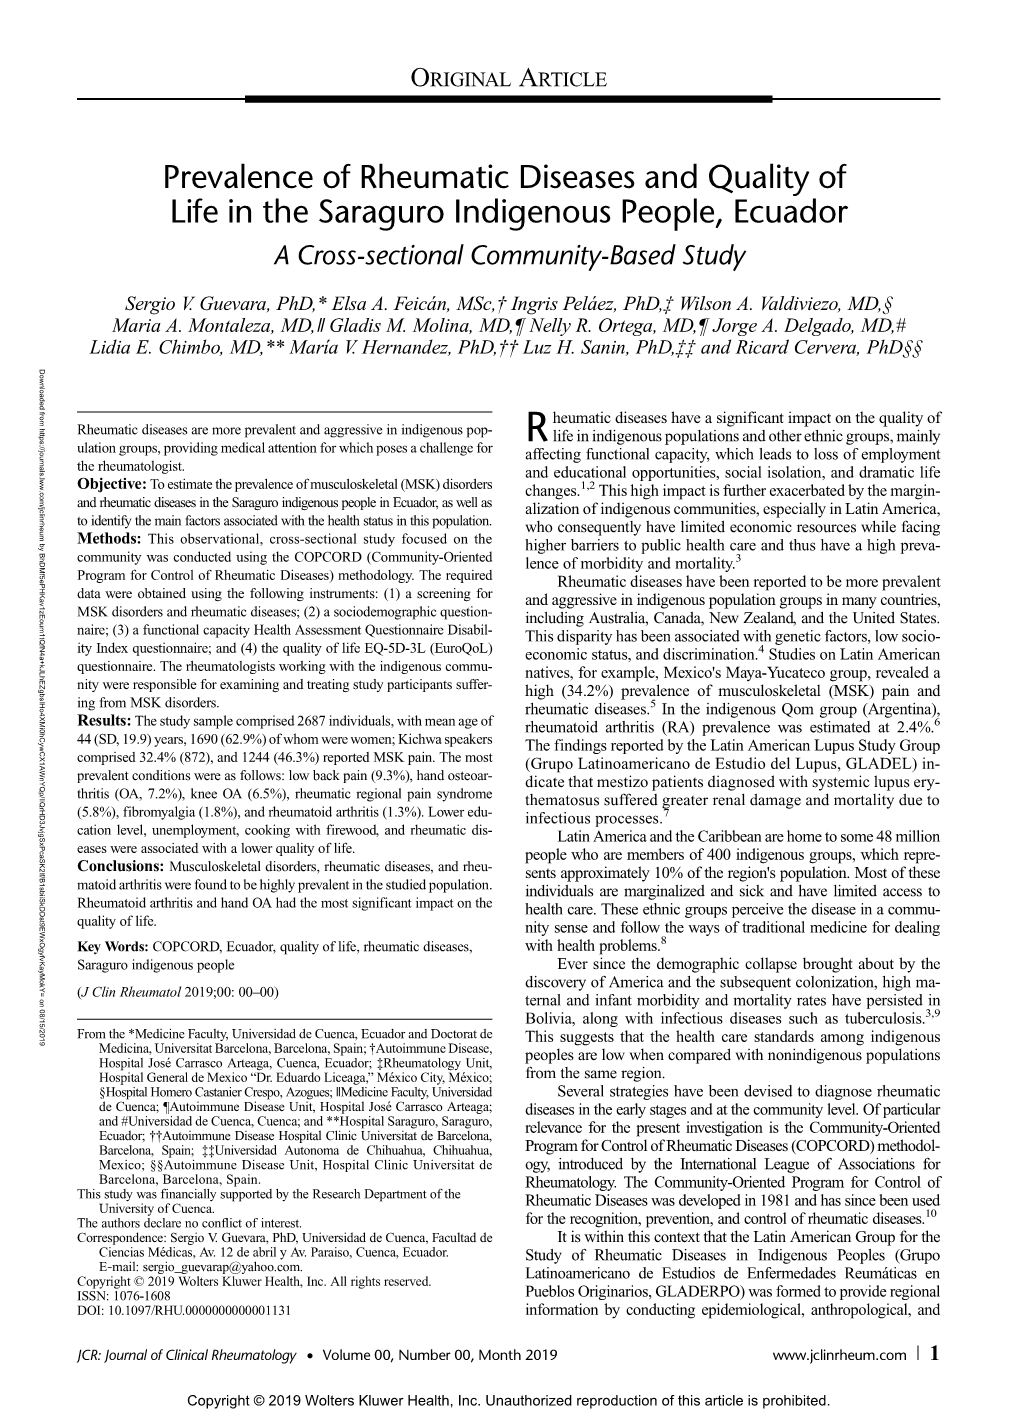 Prevalence of Rheumatic Diseases and Quality of Life in the Saraguro